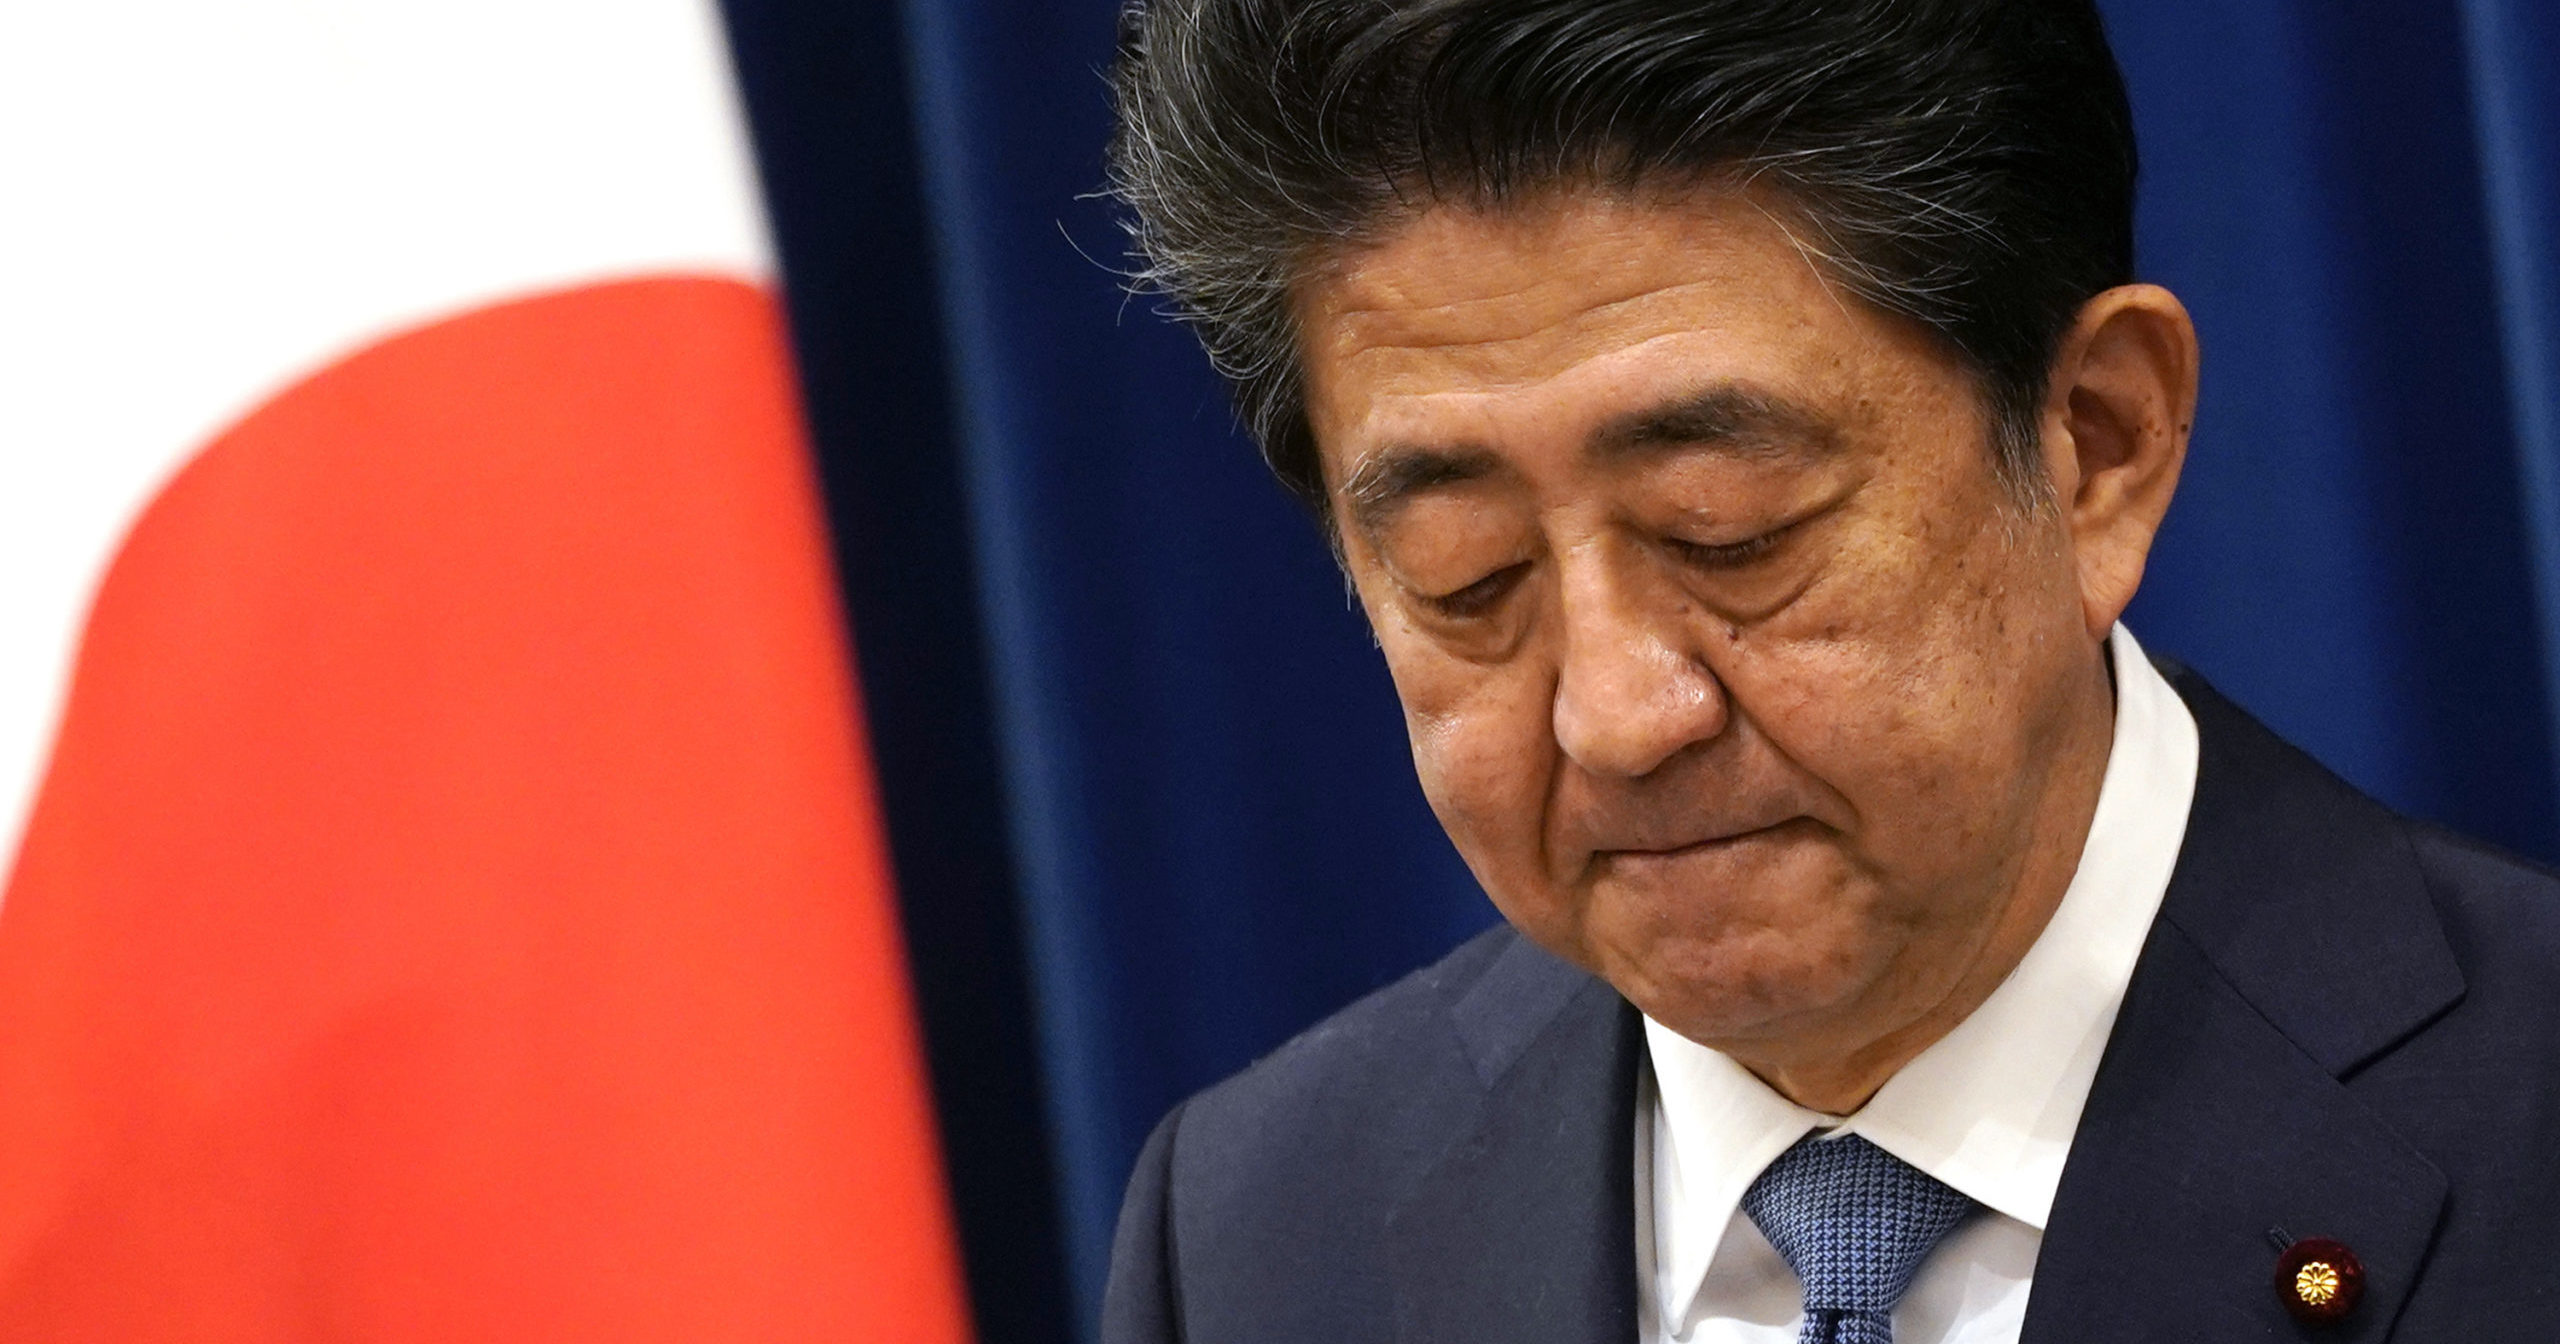 Japanese Prime Minister Shinzo Abe speaks during a news conference in Tokyo on Aug. 28, 2020. Abe, Japan’s longest-serving prime minister, says he’s resigning because a chronic illness has resurfaced.